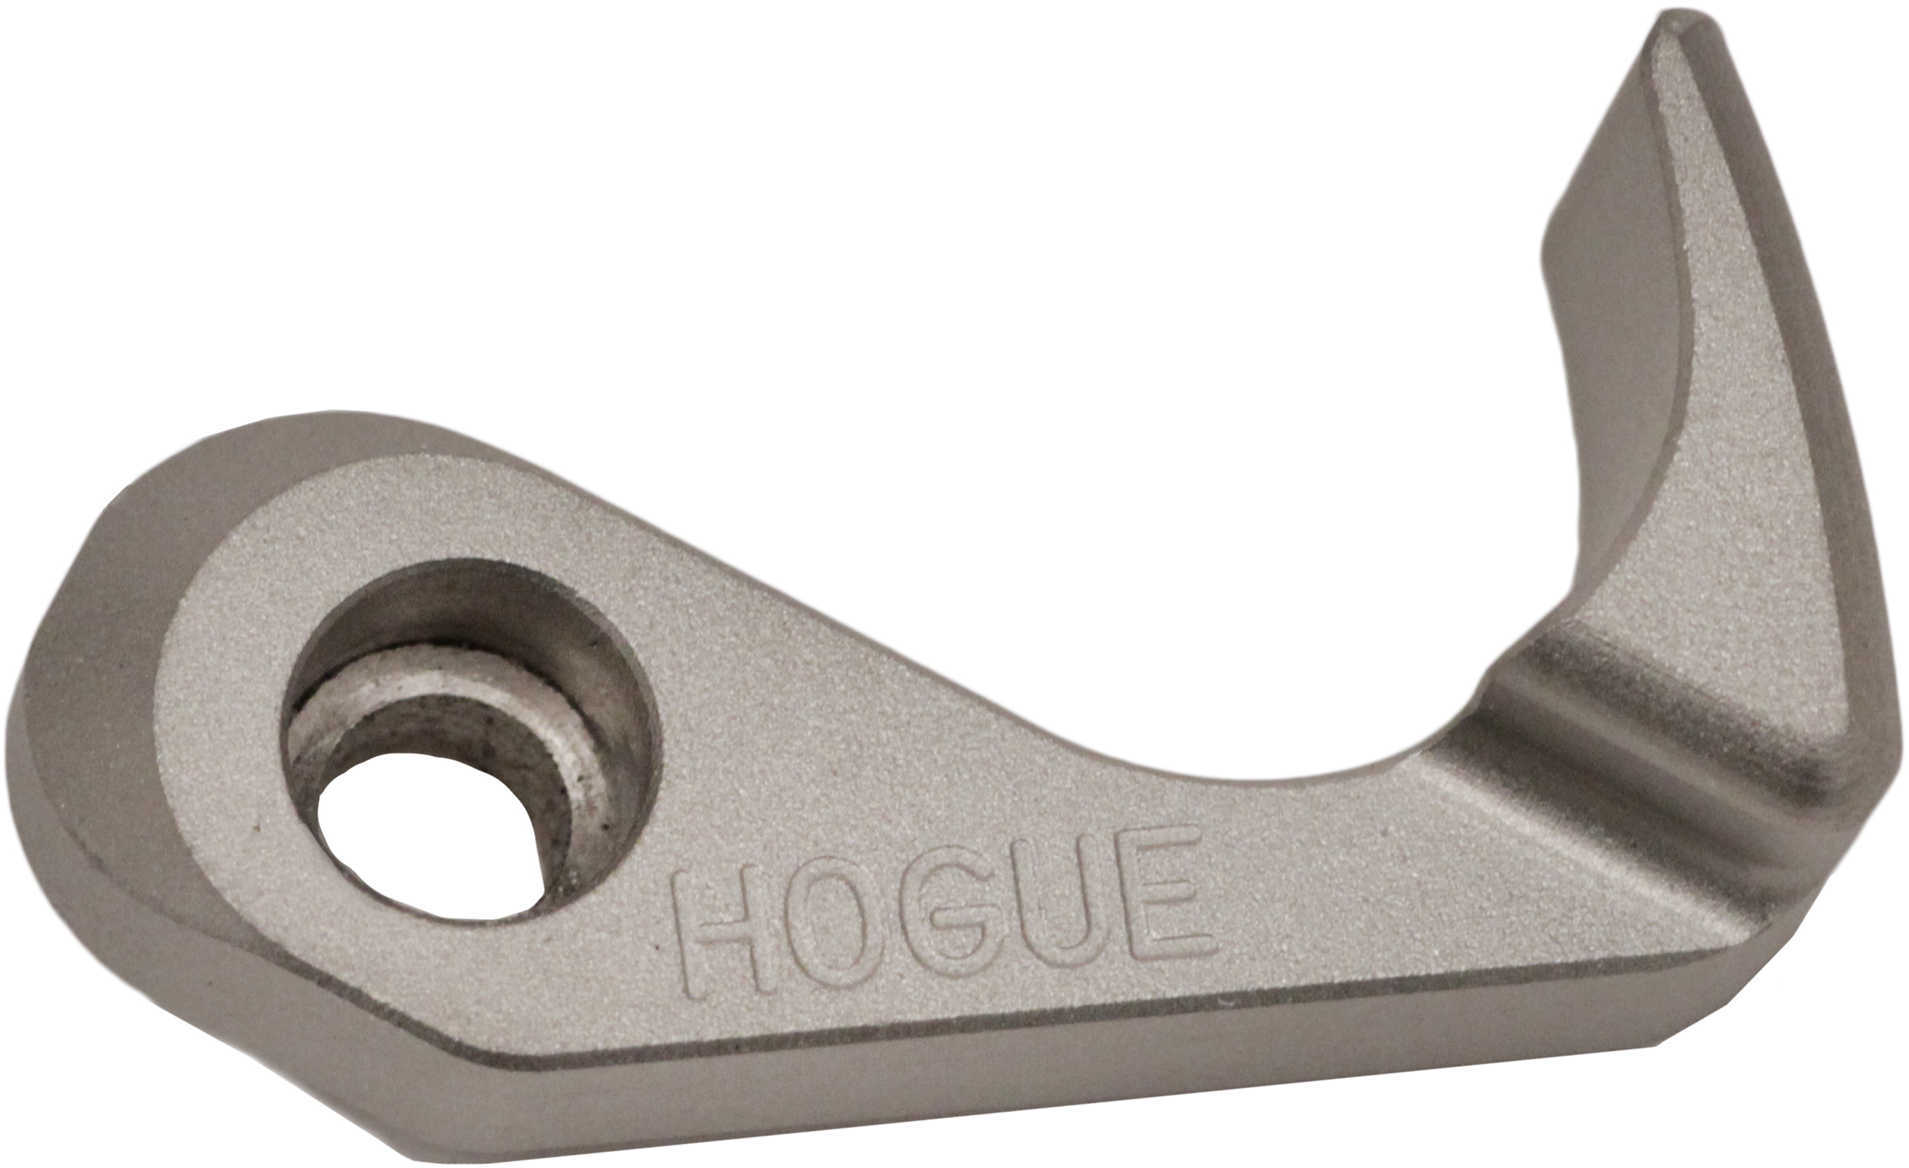 Hogue Extended Cylinder Release For Smith & Wesson Revolver Md: 00686